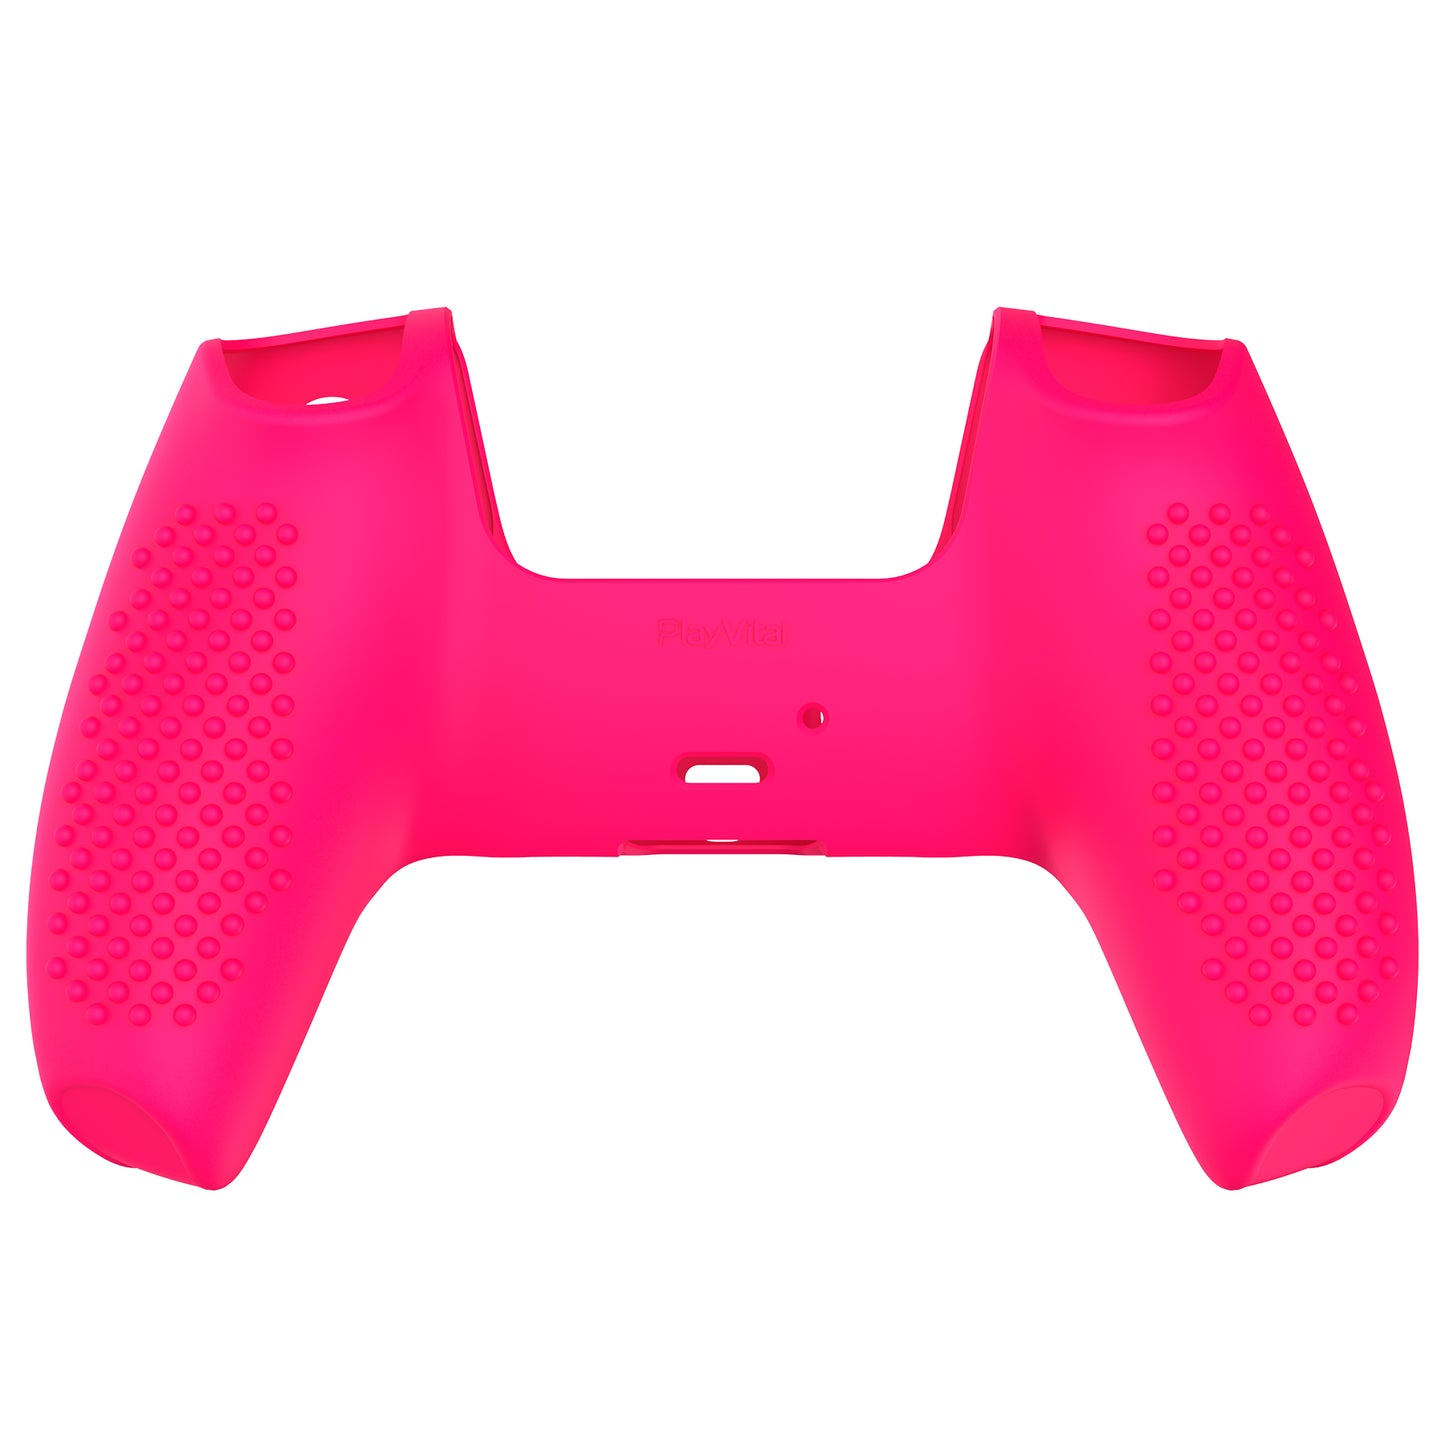 PlayVital 3D Studded Edition Anti-Slip Silicone Cover Skin with Thumb Grip Caps for PS5 Wireless Controller - Bright Pink - TDPF025 PlayVital